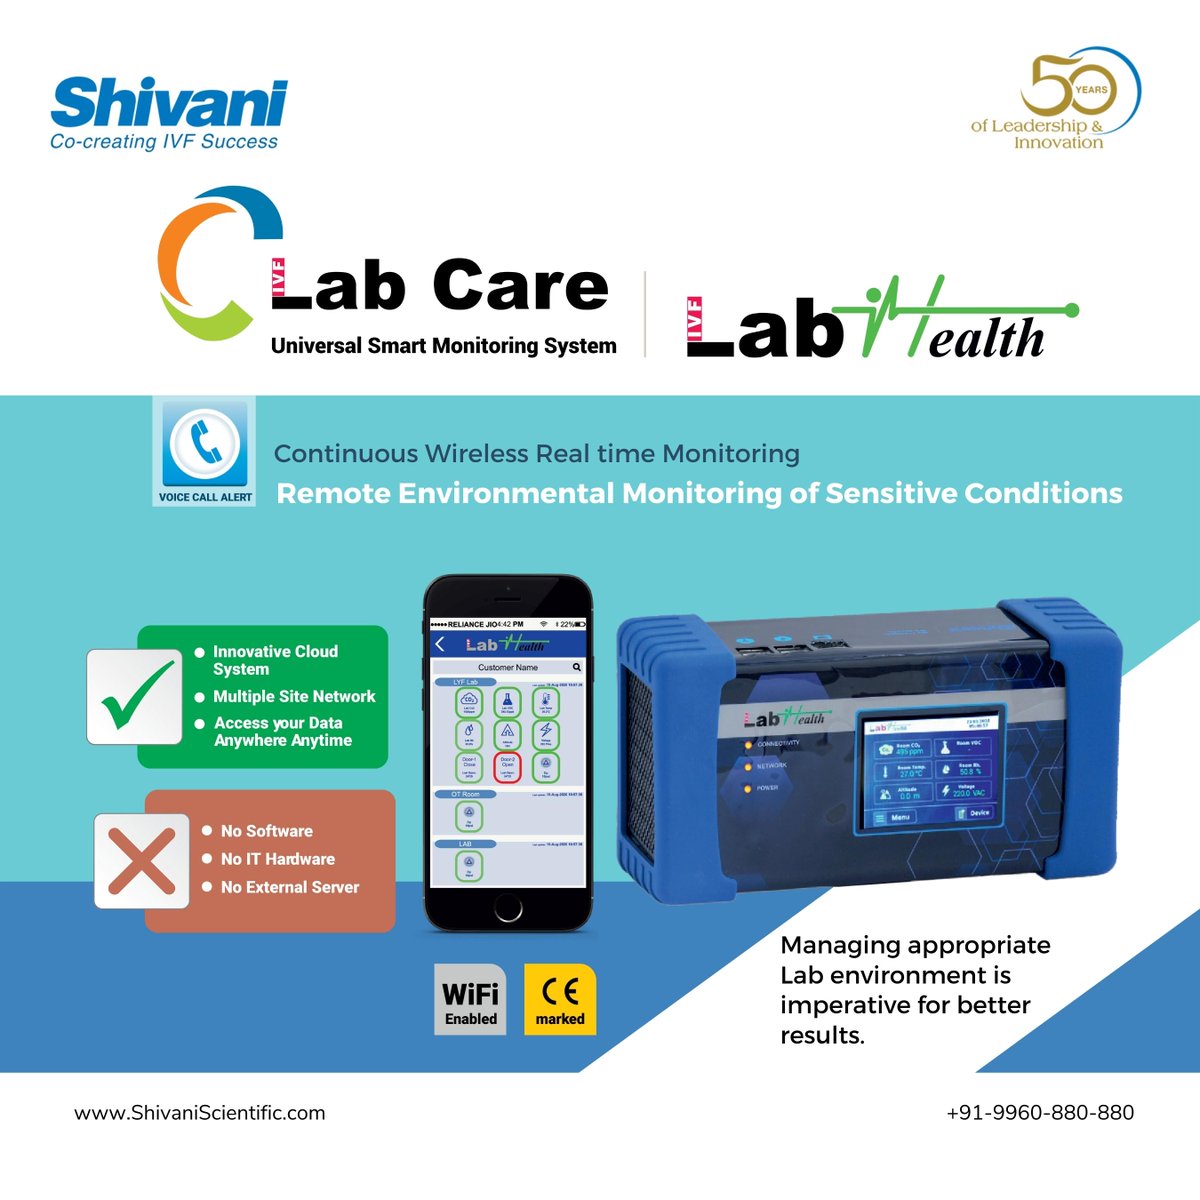 LabHealth is devised to make sure that critical medical assets are stored & kept at optimum temperature & Humidity, ensures Co2 & VOC levels within permissible limits, at the same time eliminating the need of manual measurements thus enabling efficiency https://t.co/AuphDMcJ8a